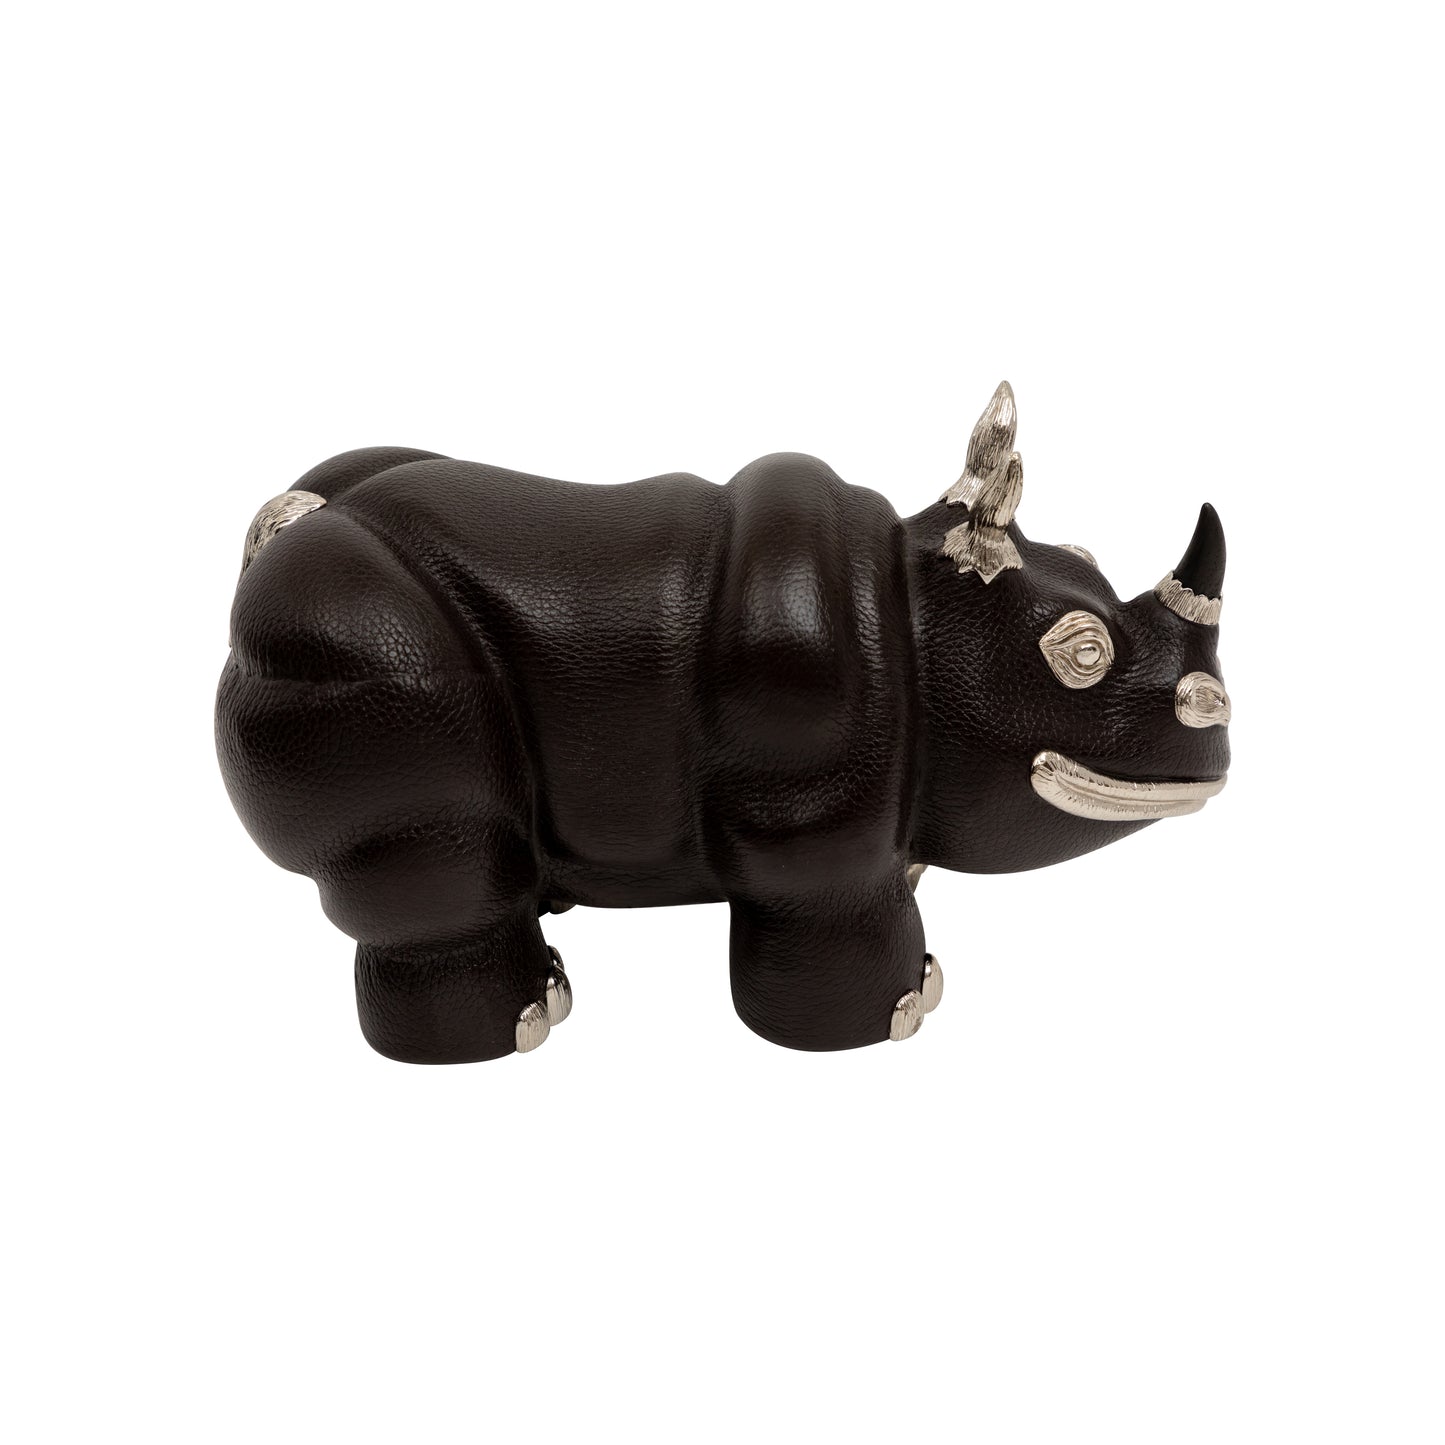 Rhino Paperweight/Bookend